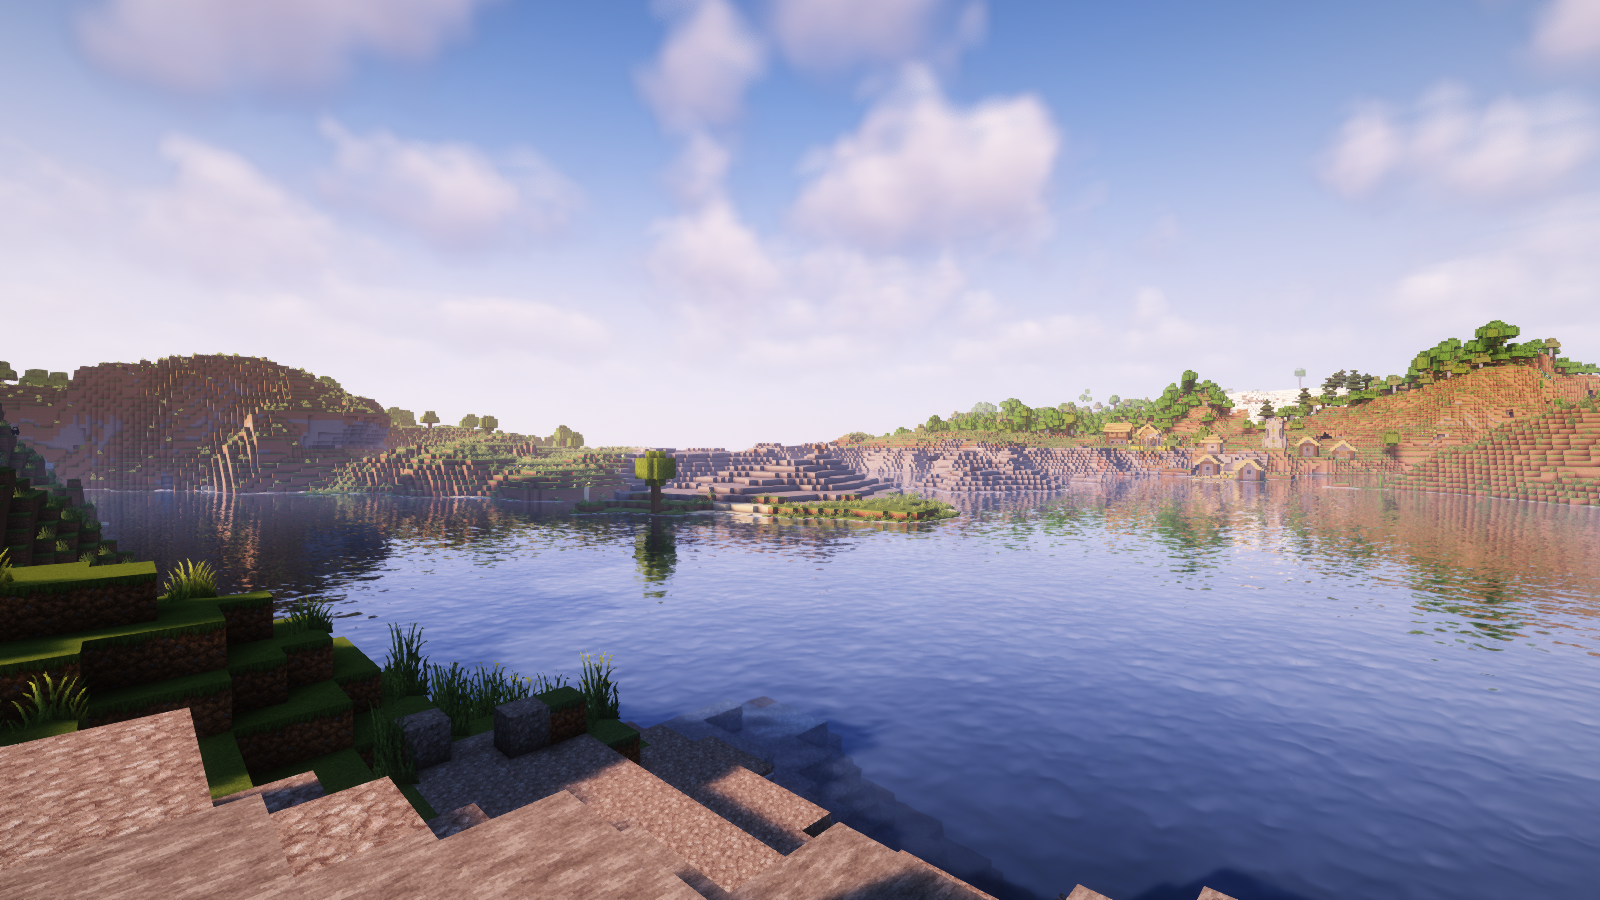 A screenshot of the lake opposite a lakeside village.
Screenshot taken using Faithful resource pack and Complimentary Reimaged shaders.